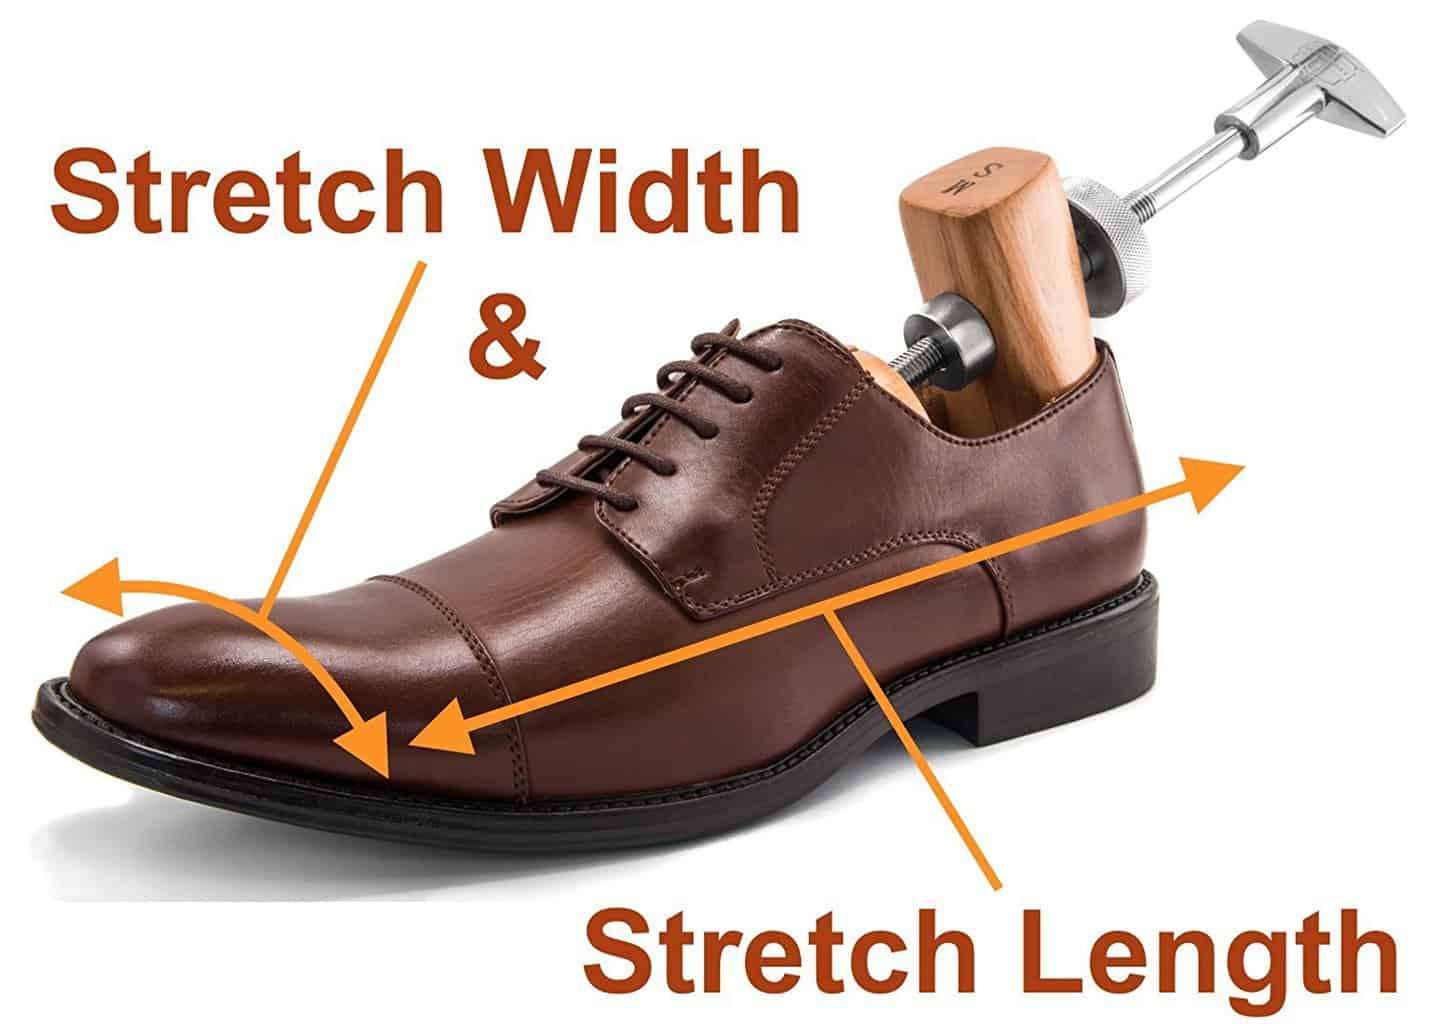 what stretches leather shoes